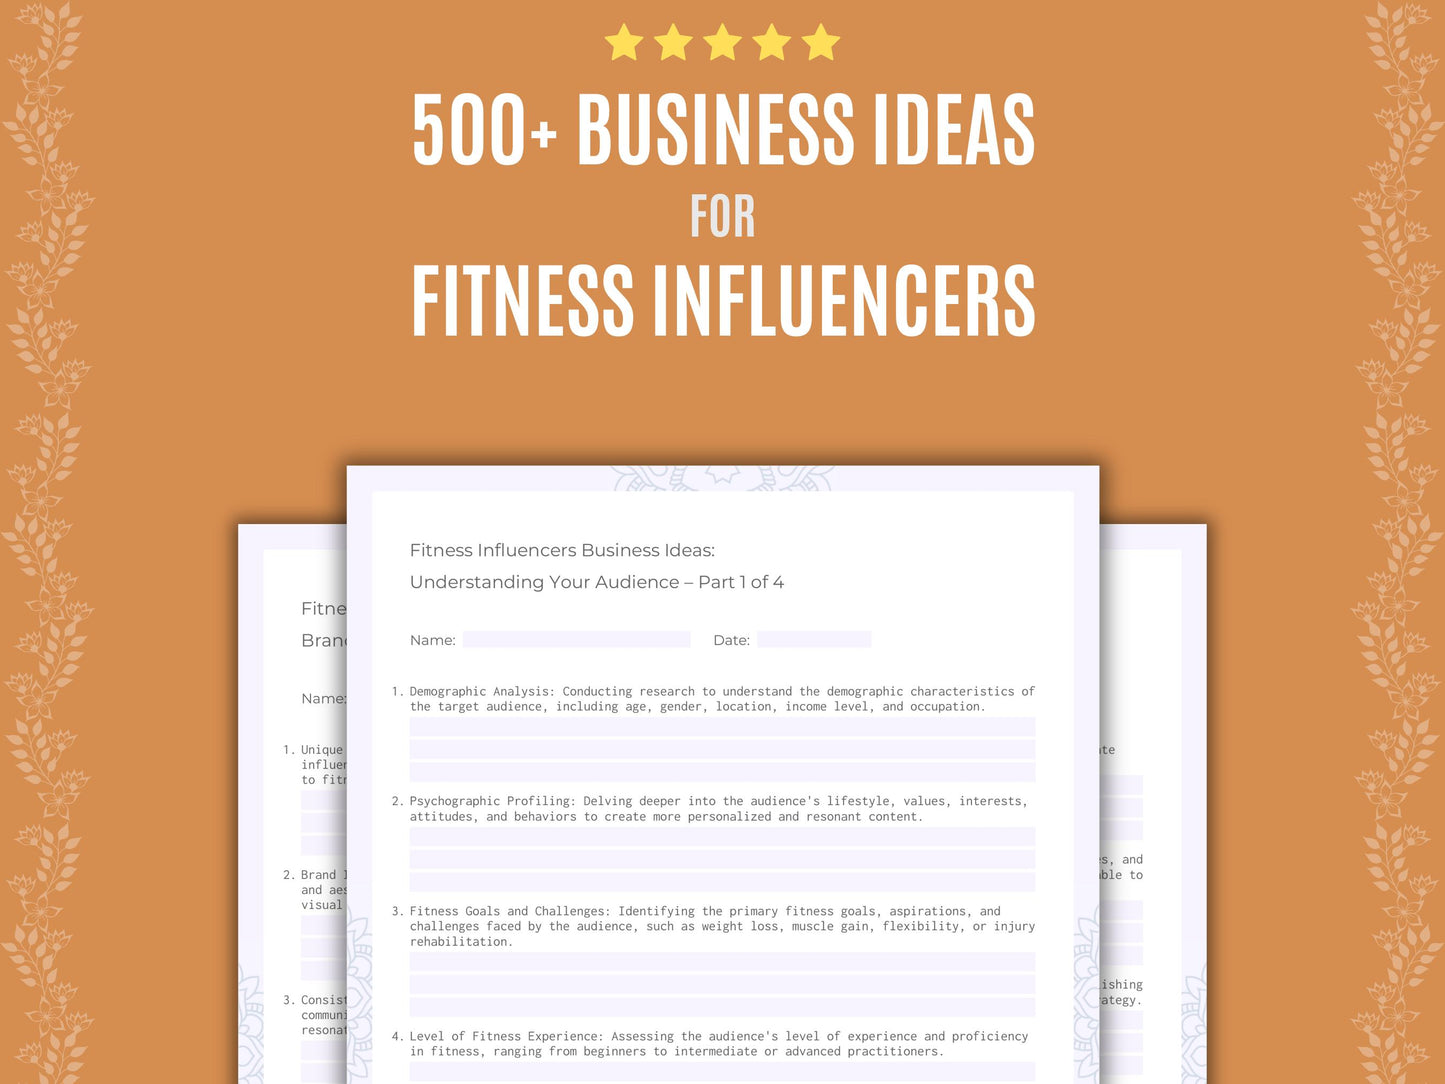 Fitness Influencers Business Ideas